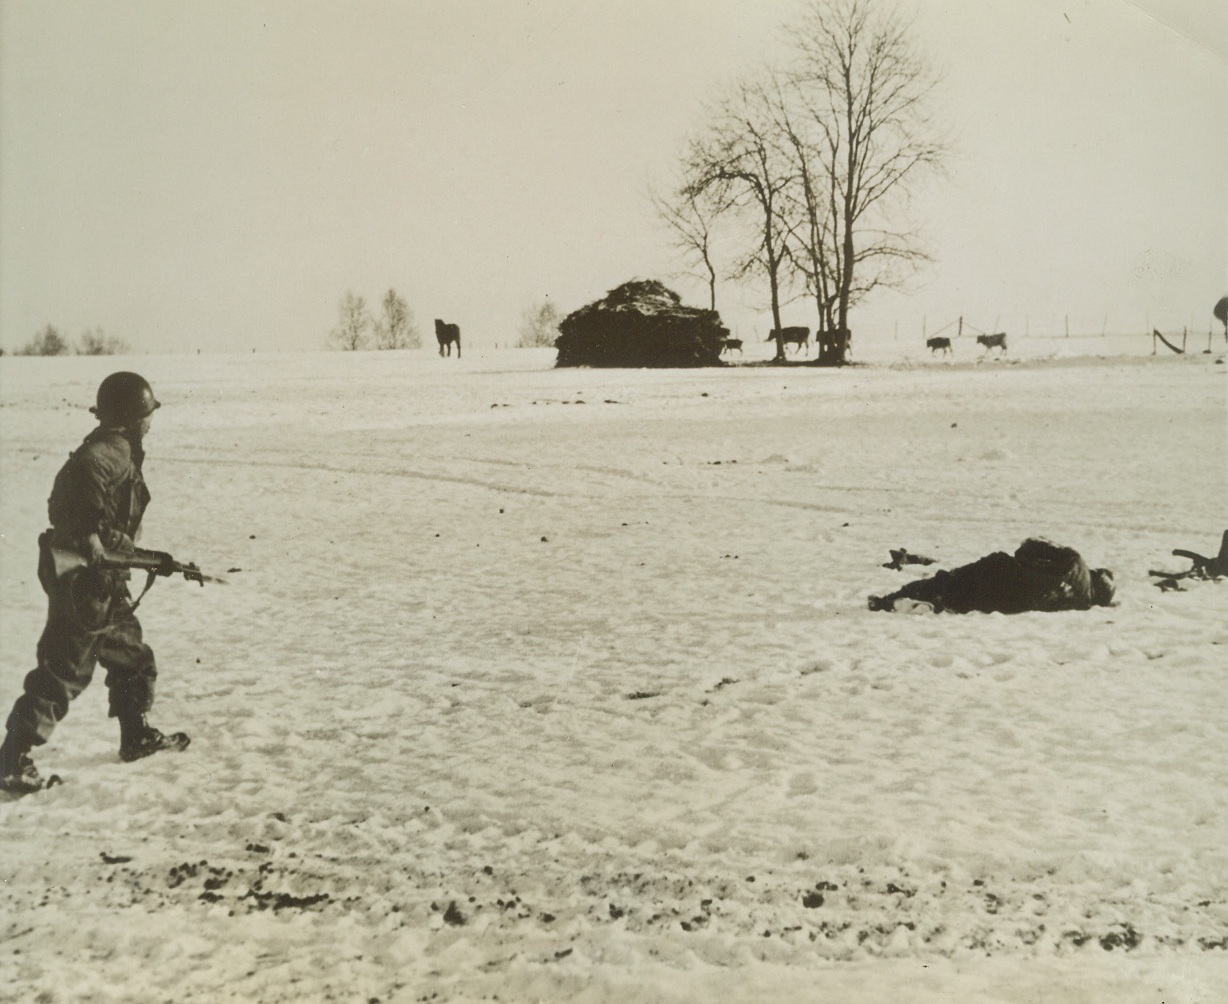 MAN IN THE SNOW, 1/6/1945. BASTOGNE, BELGIUM—Advancing cautiously across a snow-covered field, an American soldier nears the spot where a Nazi fighter lies. He keeps his gun ready for use at a moment’s notice until he finds out whether the man is dead or alive. Credit: Acme;